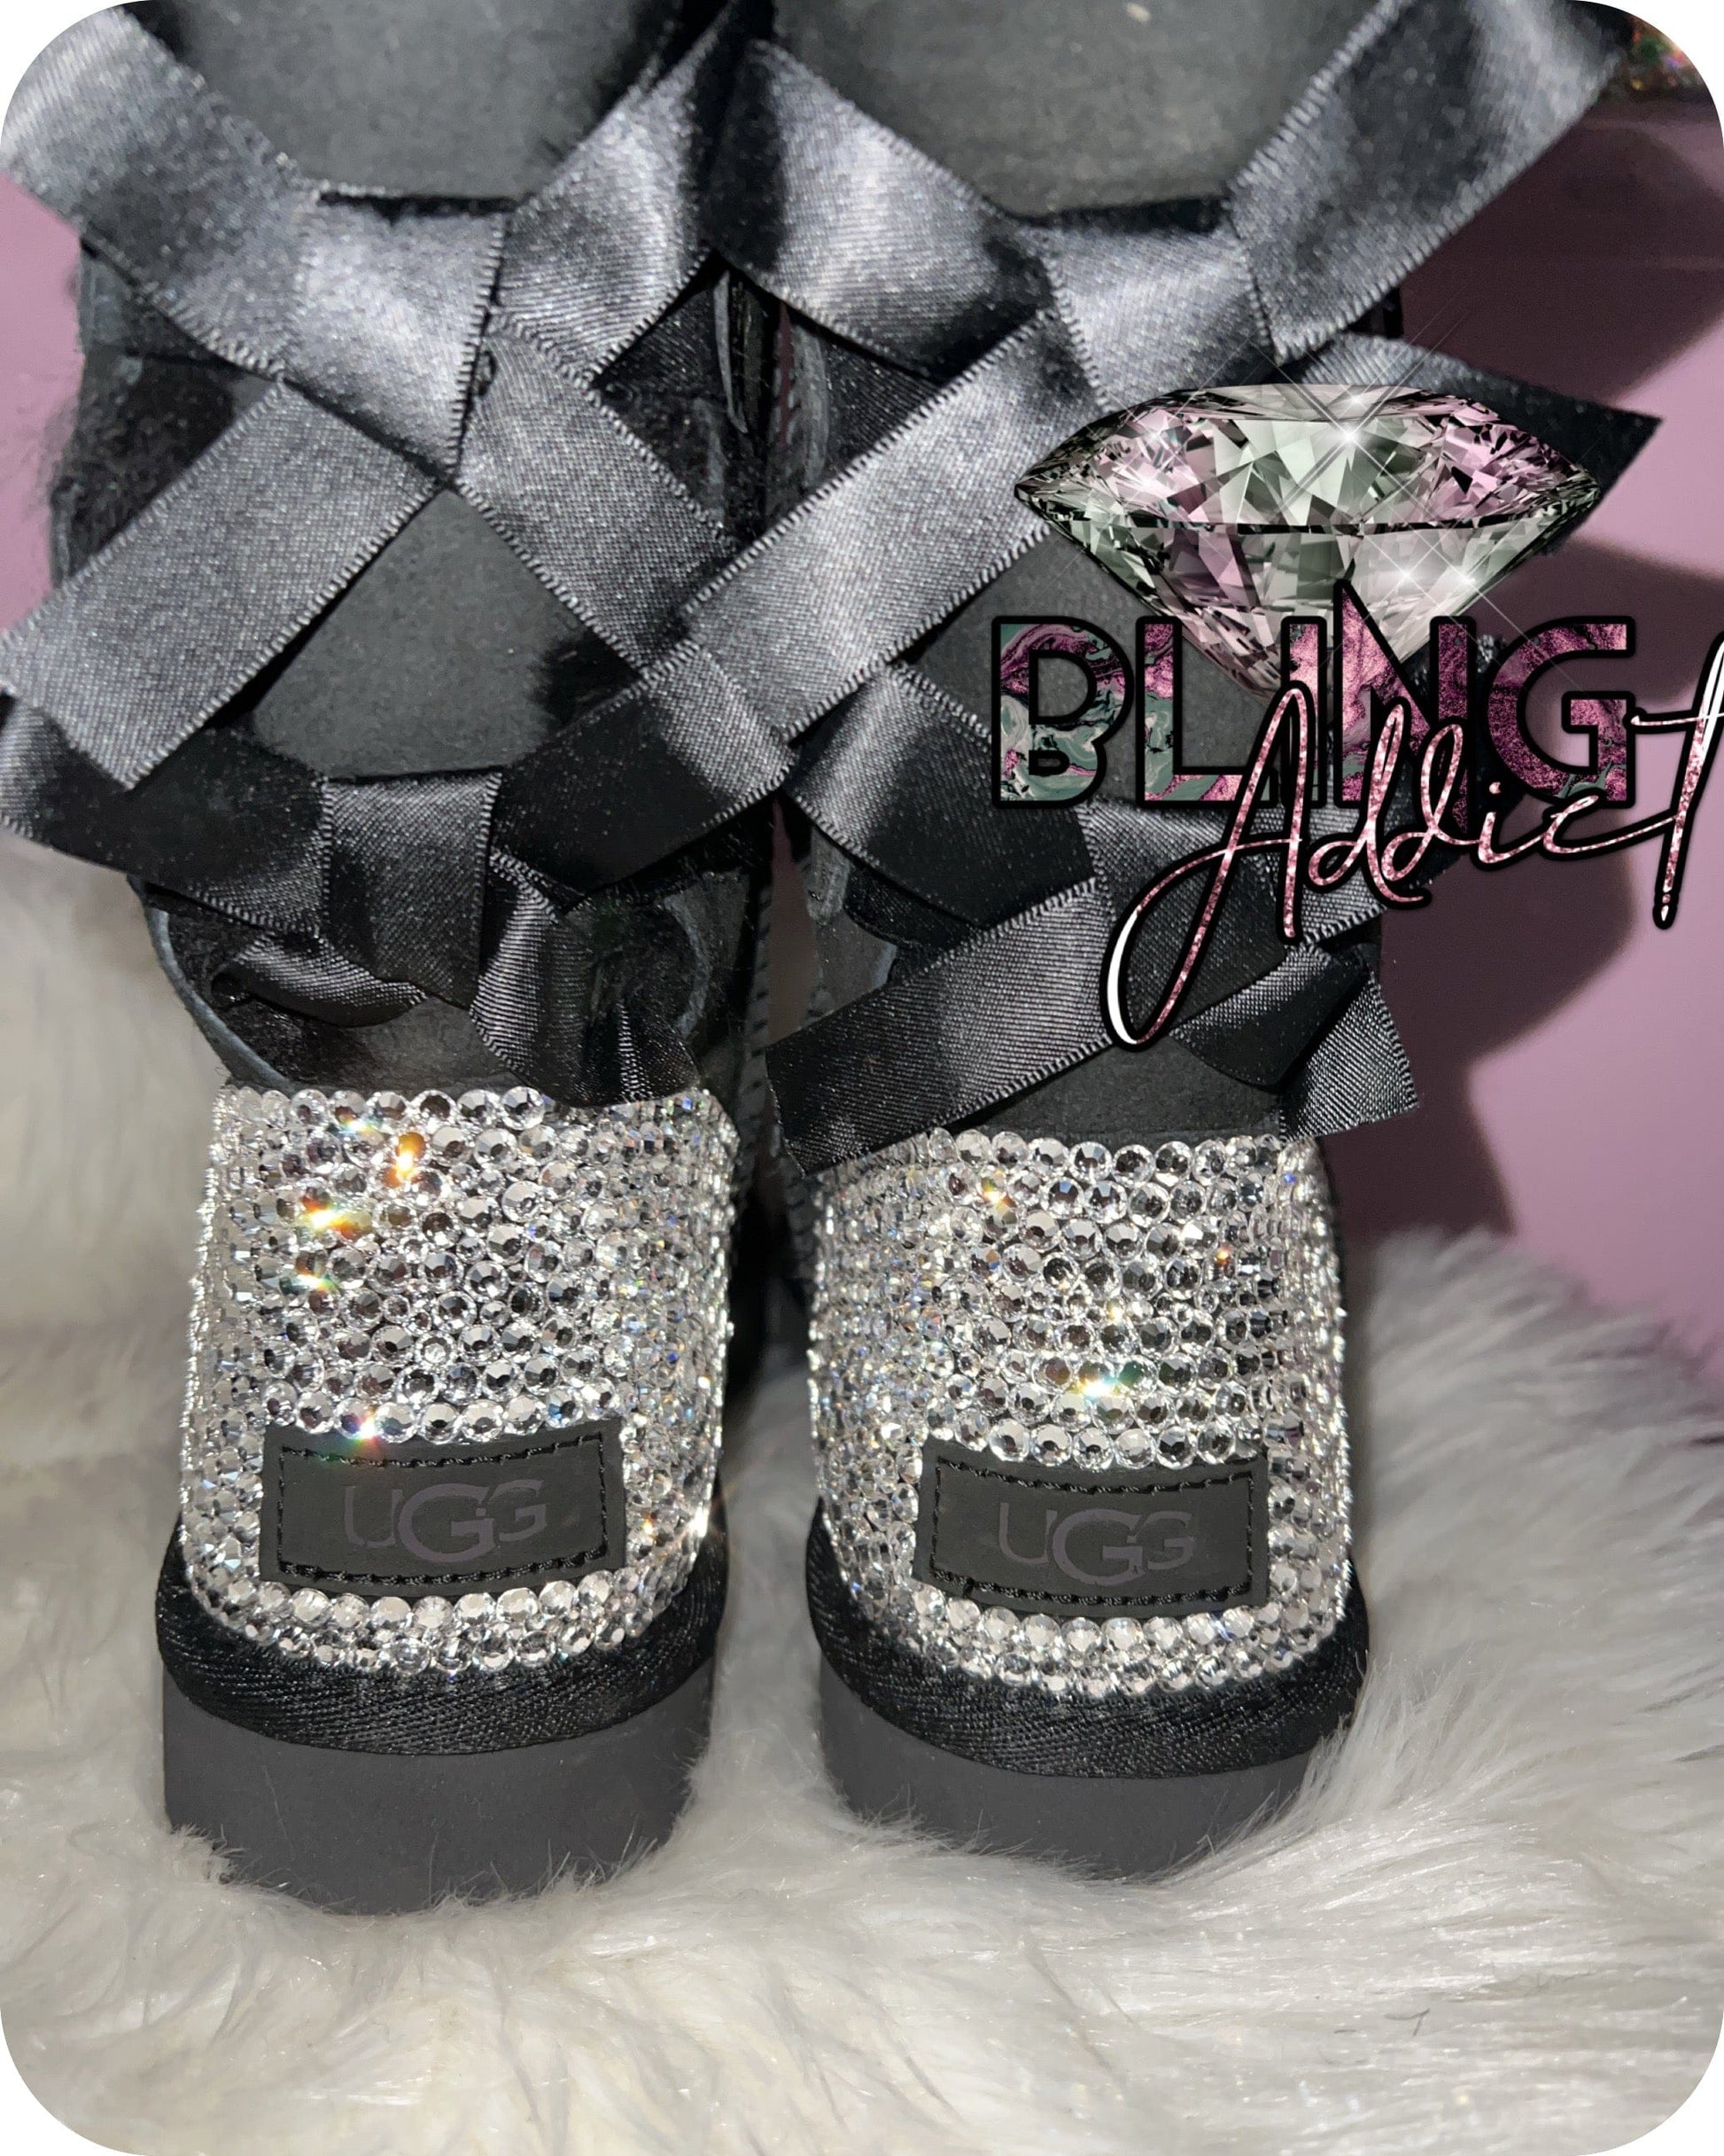 Women's UGG Bailey Bow II Boots made with Xirus 2088 Crystals Shoes by BlingxAddict | BlingxAddict